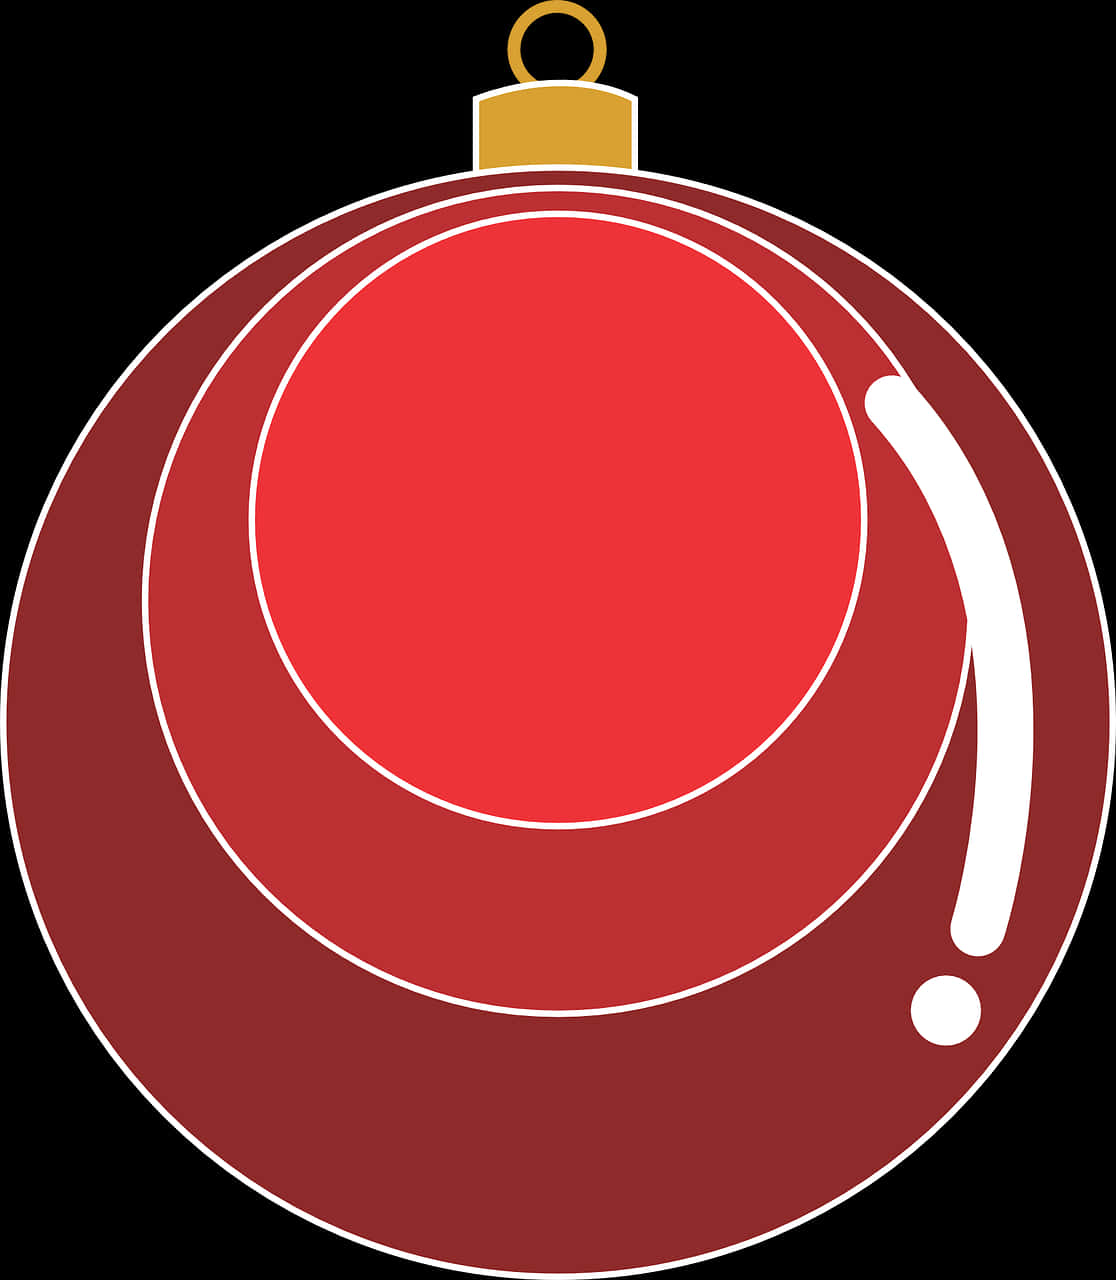 Red Christmas Ornament Vector